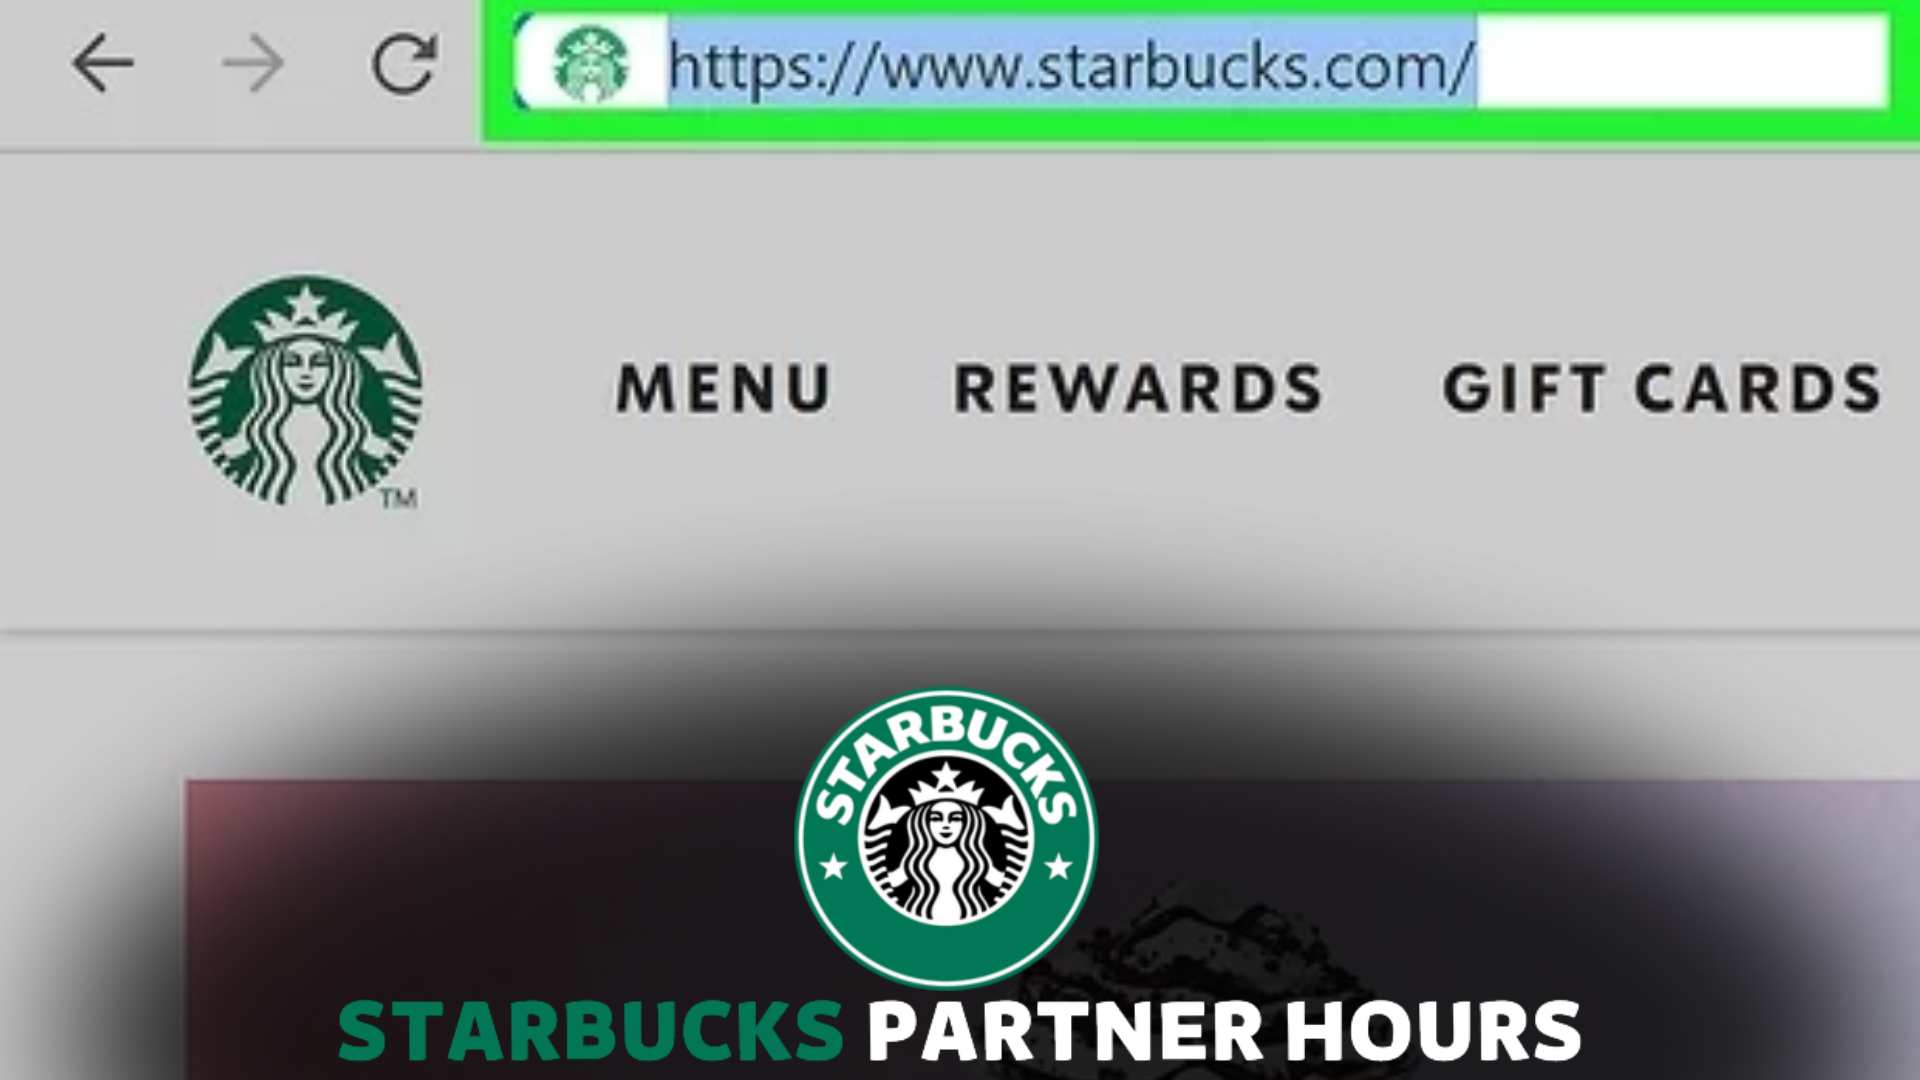 How to Set Up a Partner Card on the Starbucks App